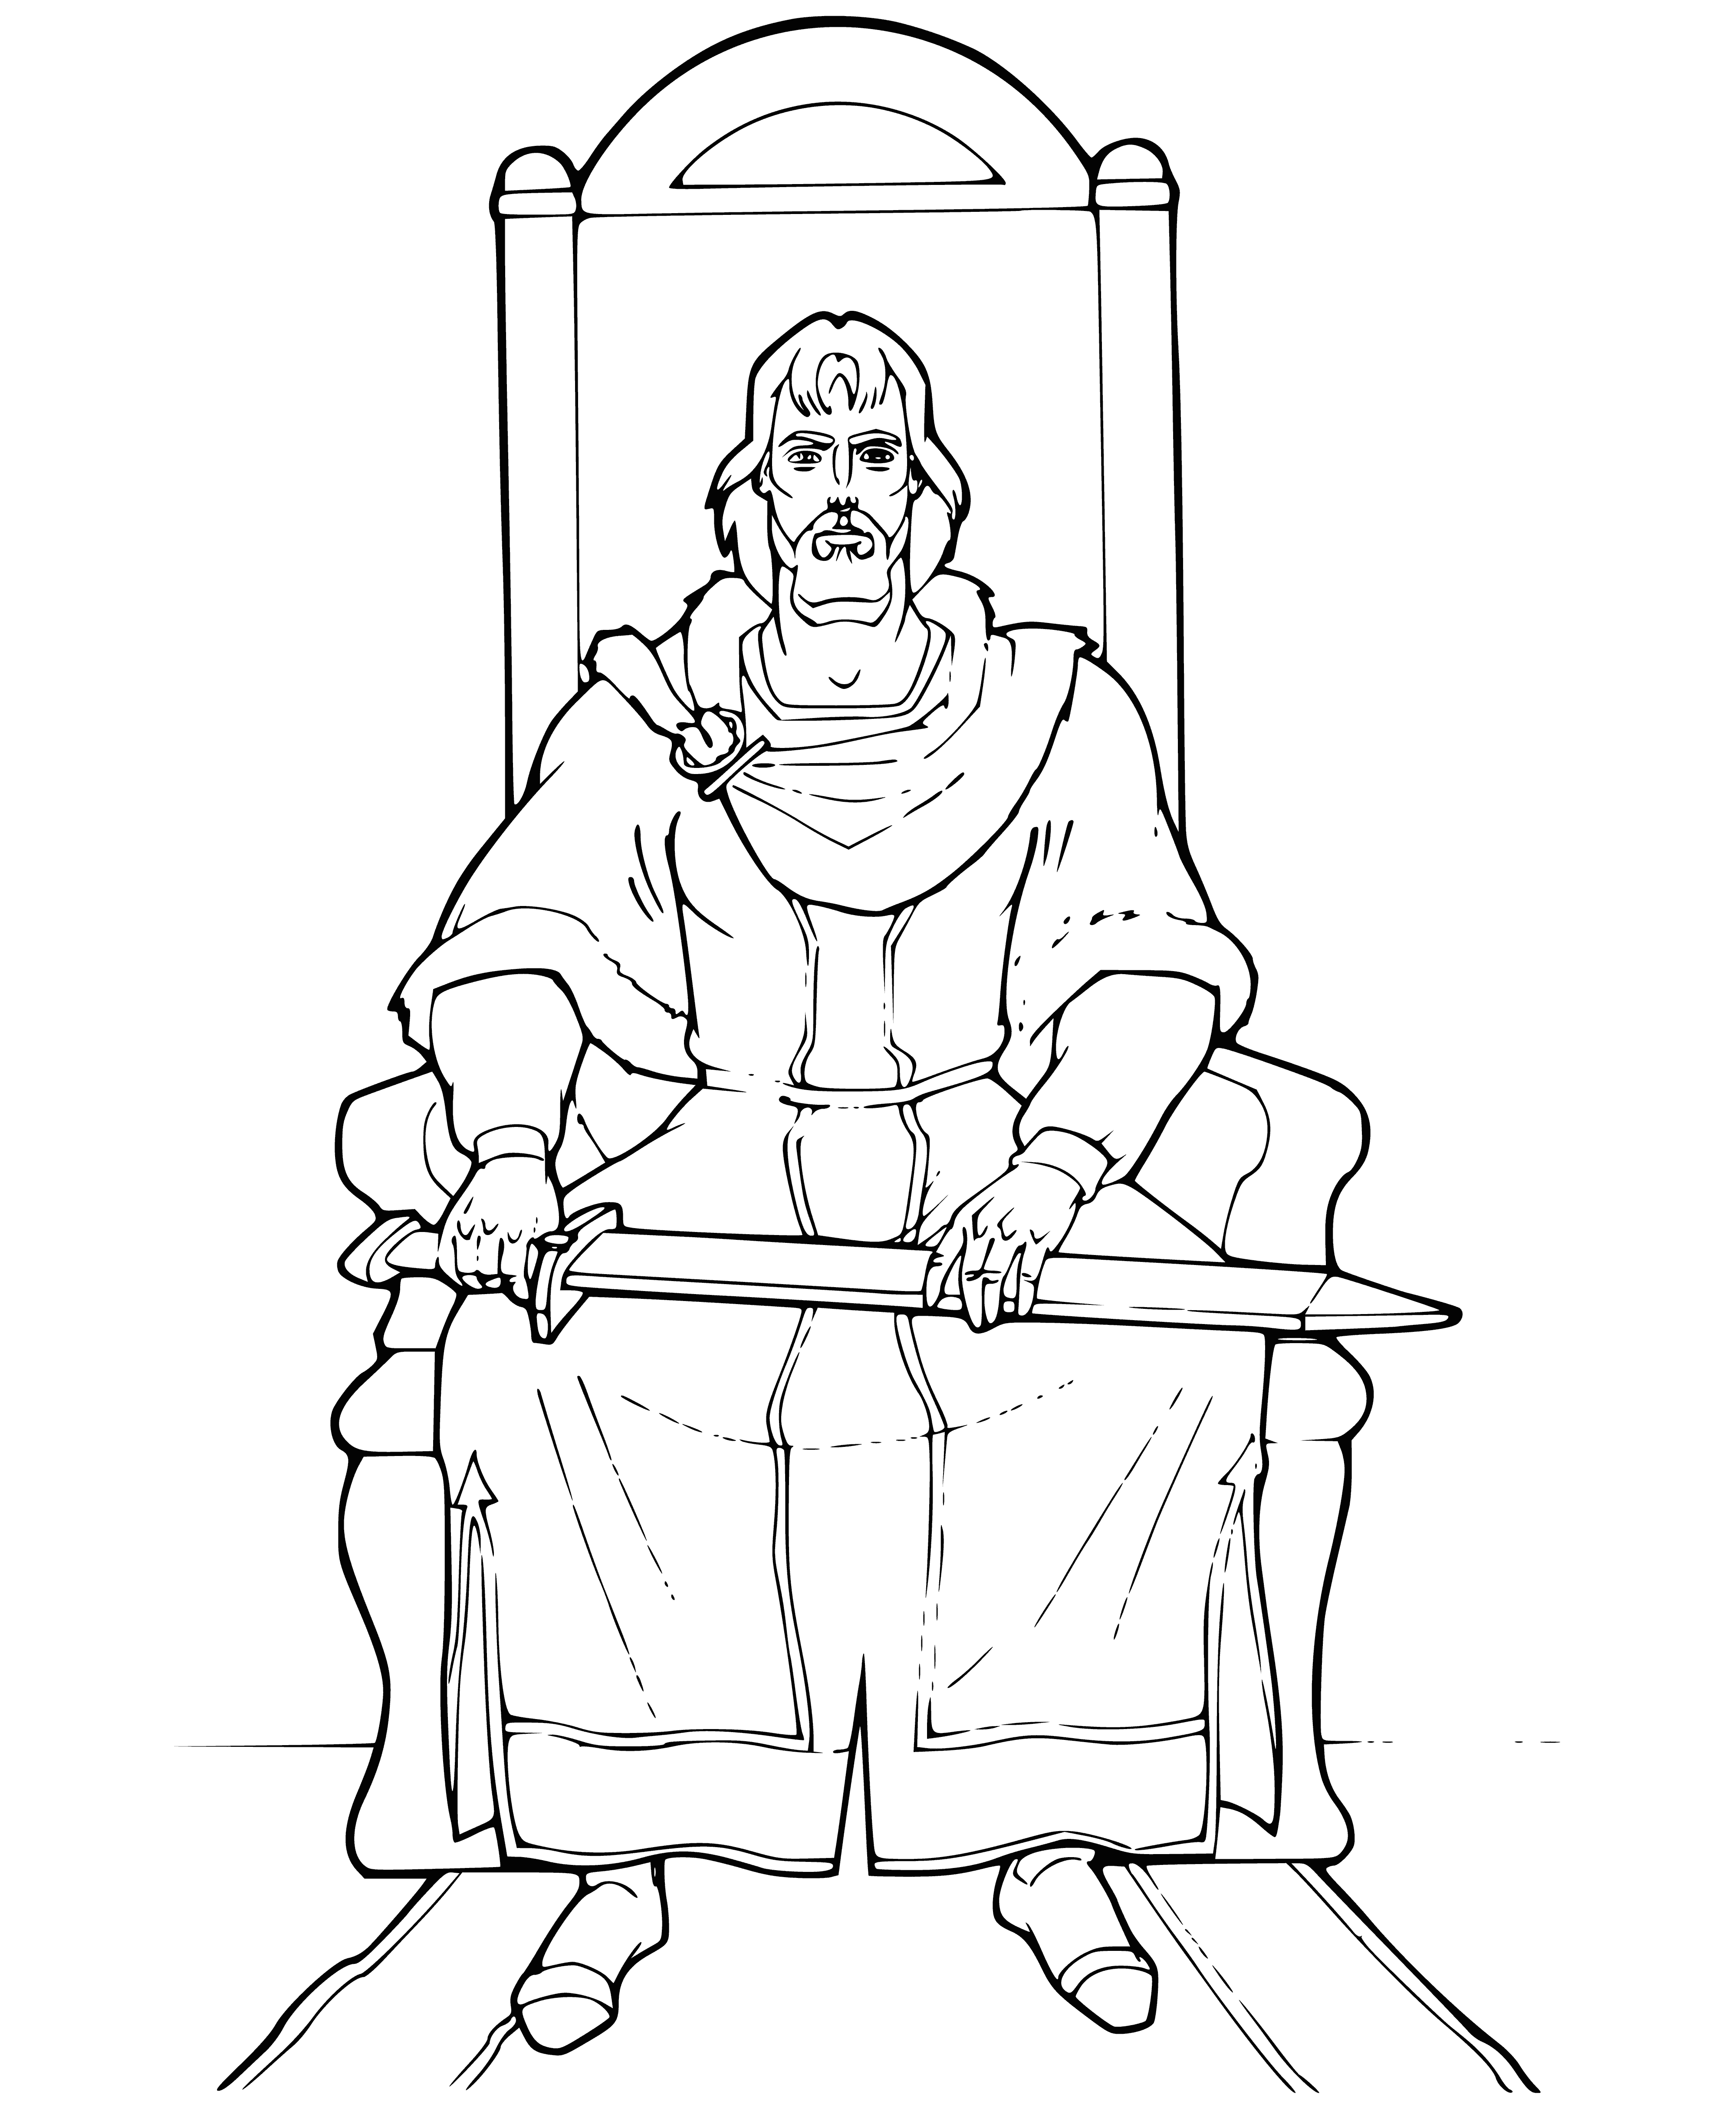 coloring page: Prince Vladimir is on the throne, wearing a crown & wielding a scepter - looking to the right.